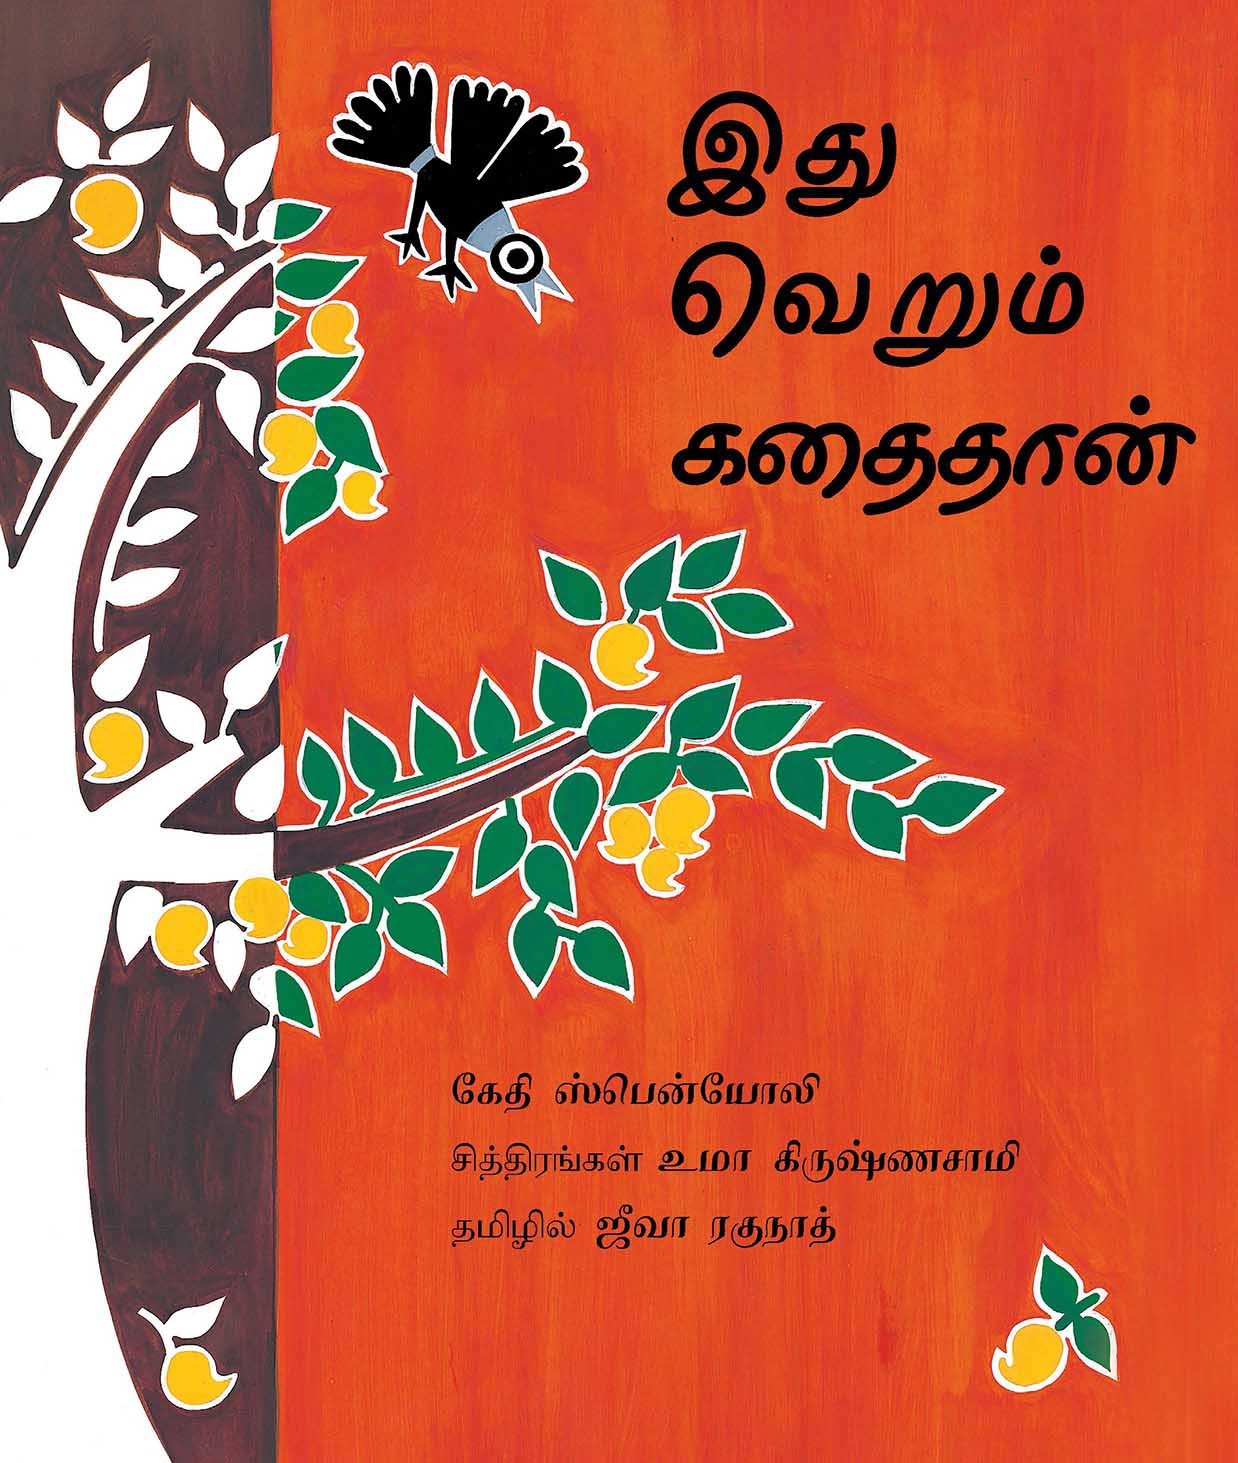 It's Only A Story/Idu Verum Kathaithaan (Tamil)